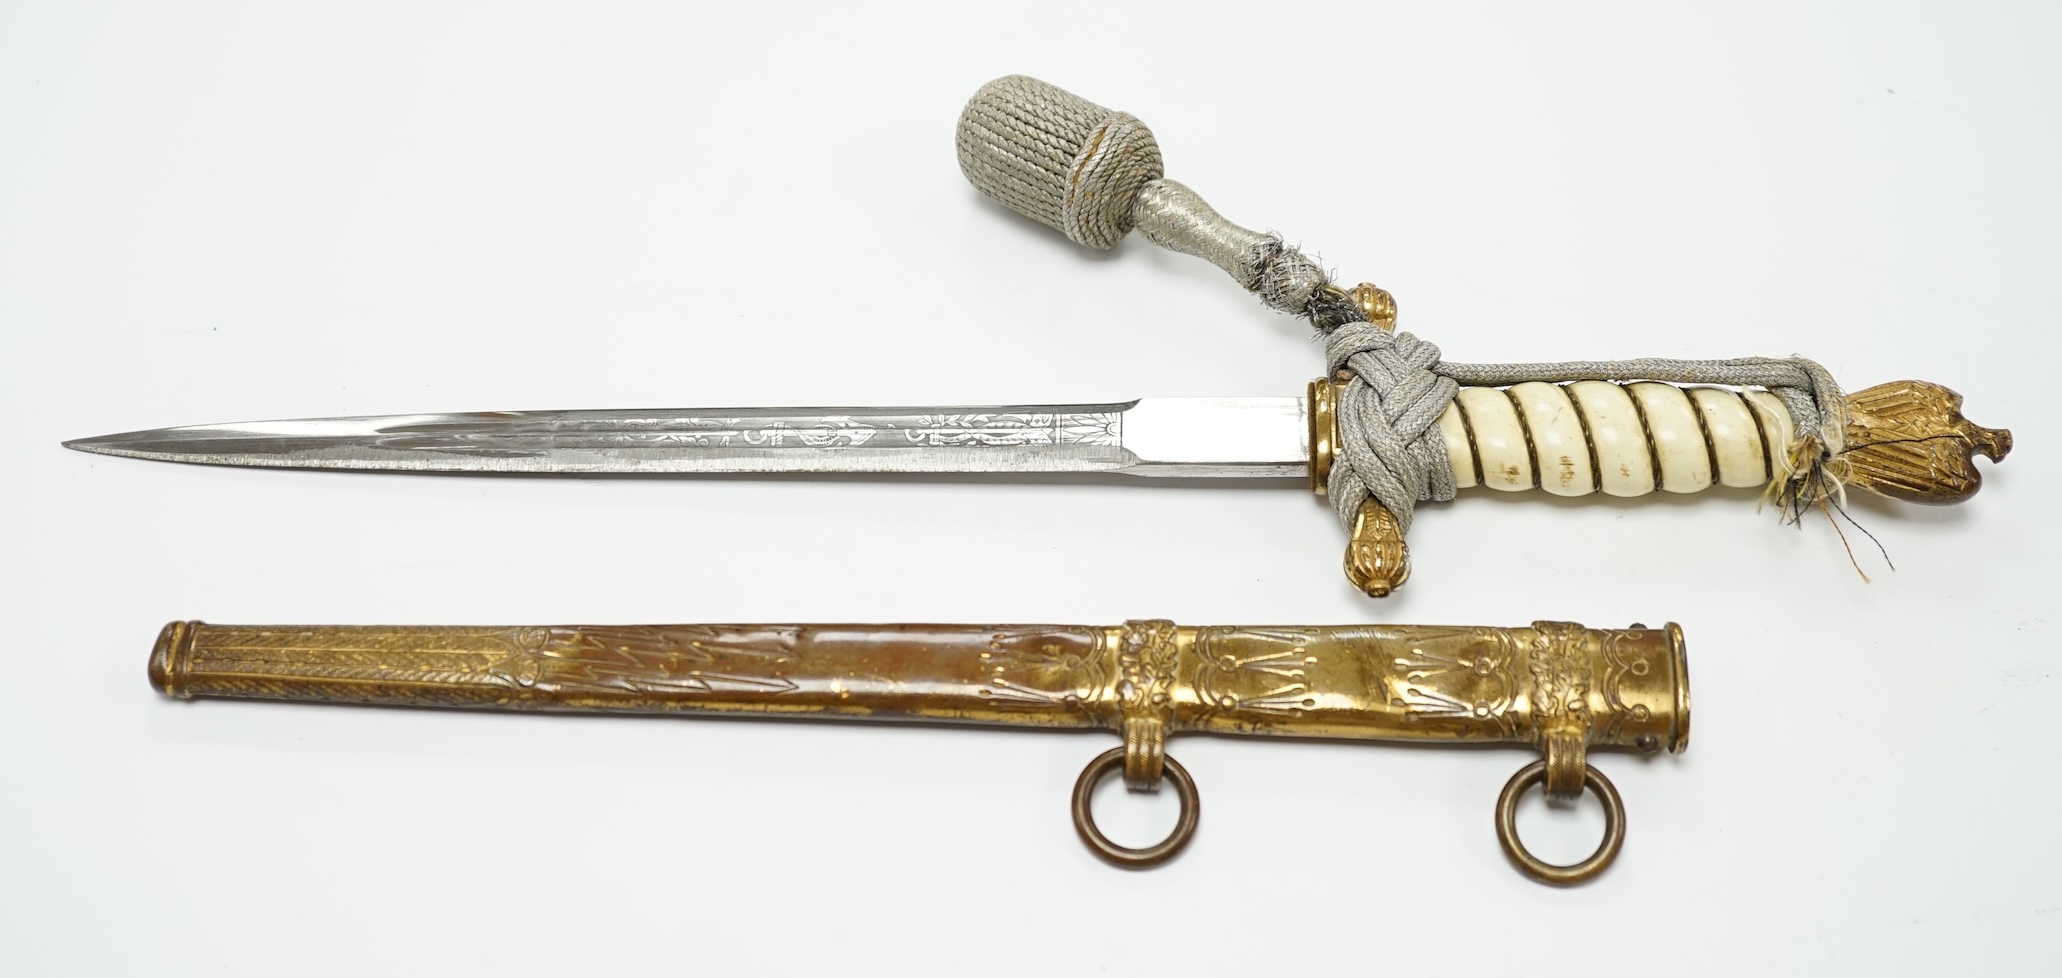 A WWII German naval officer's dagger, by Eickhorn, etched blade, roughly sharpened on one edge, regulation brass mounts, composition grip, silver bullion dress knot. Condition - fair, worn with locking catch removed